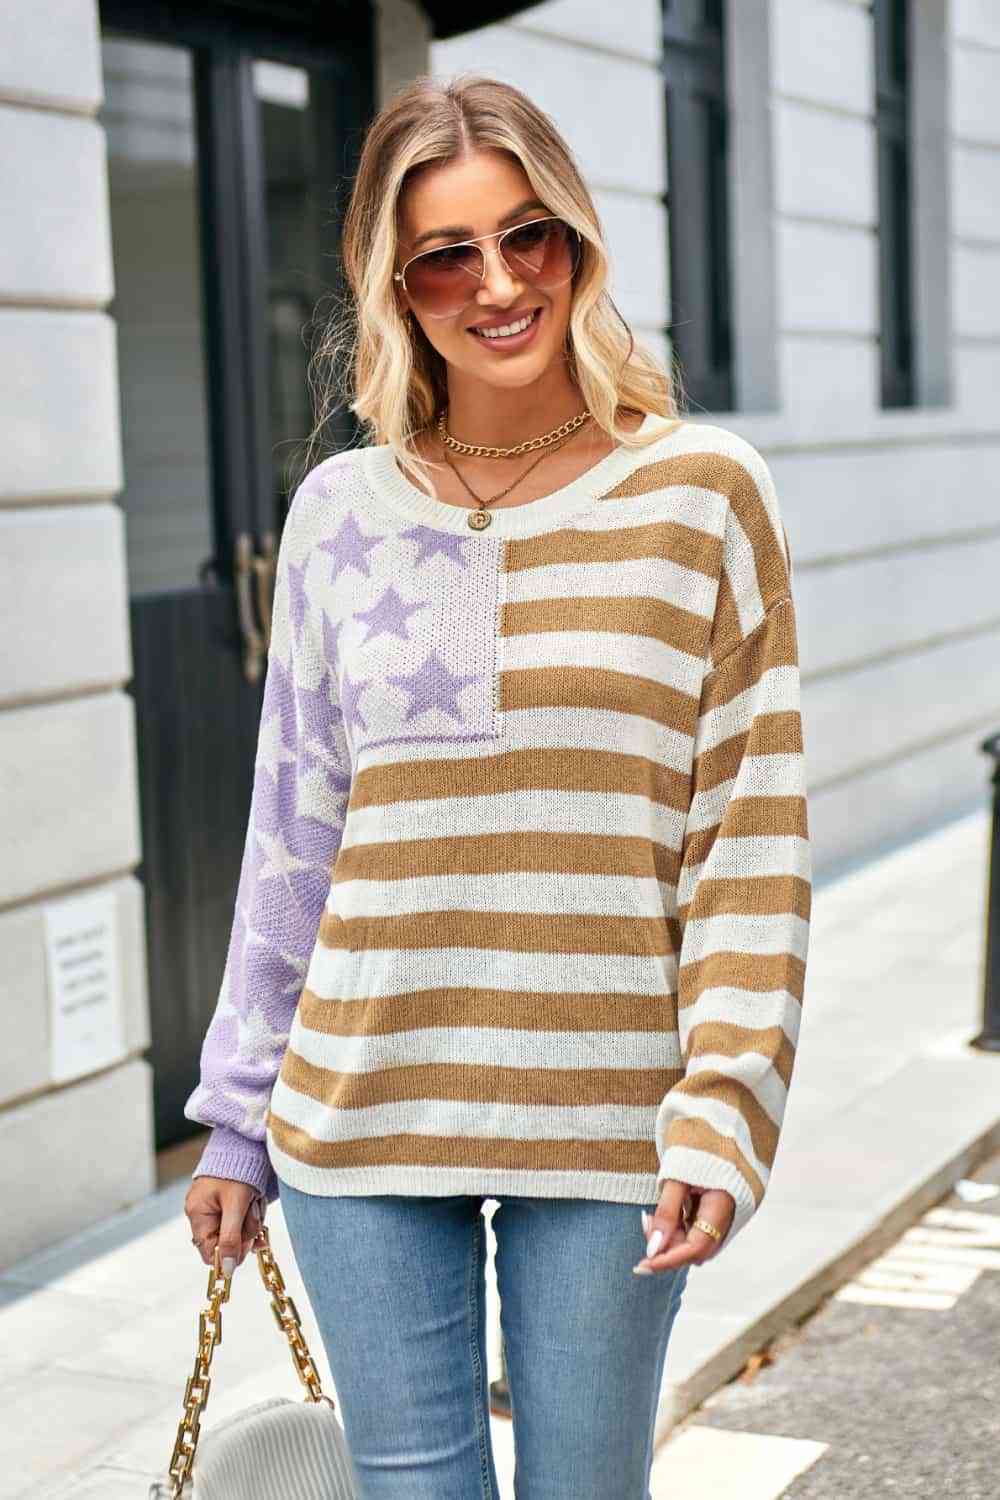 Round Neck US Flag Dropped Shoulder Sweater - Guy Christopher